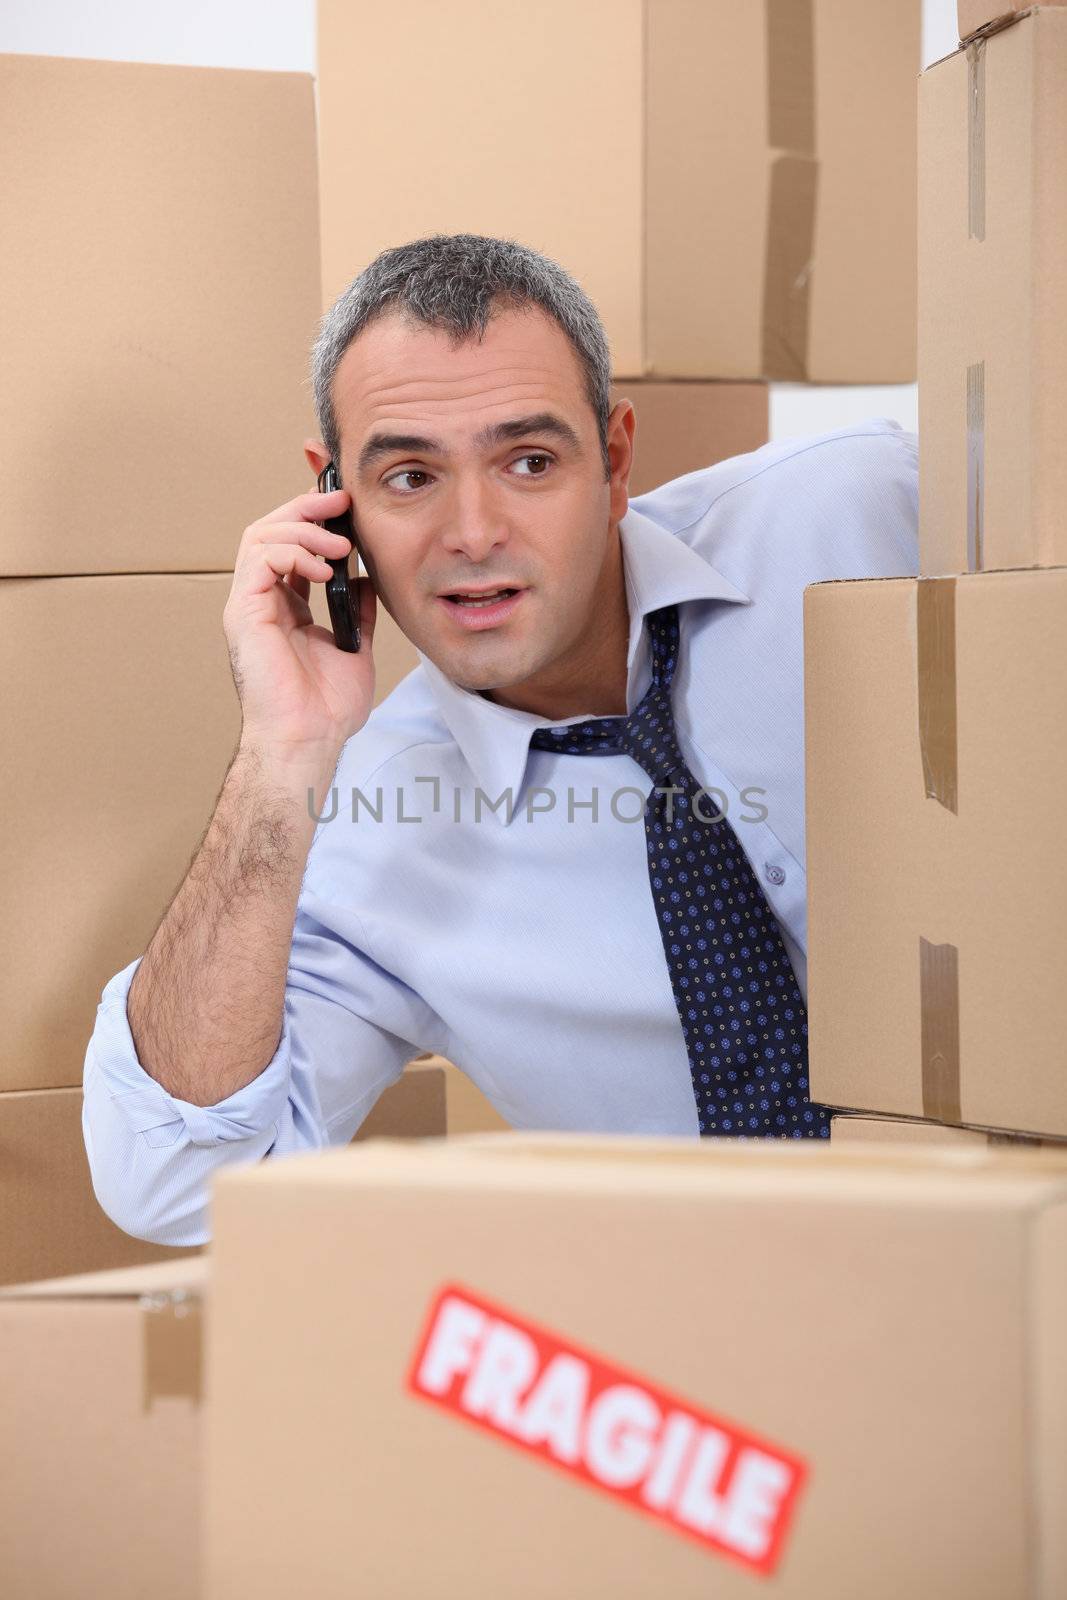 Cellphone user surrounded by boxes by phovoir